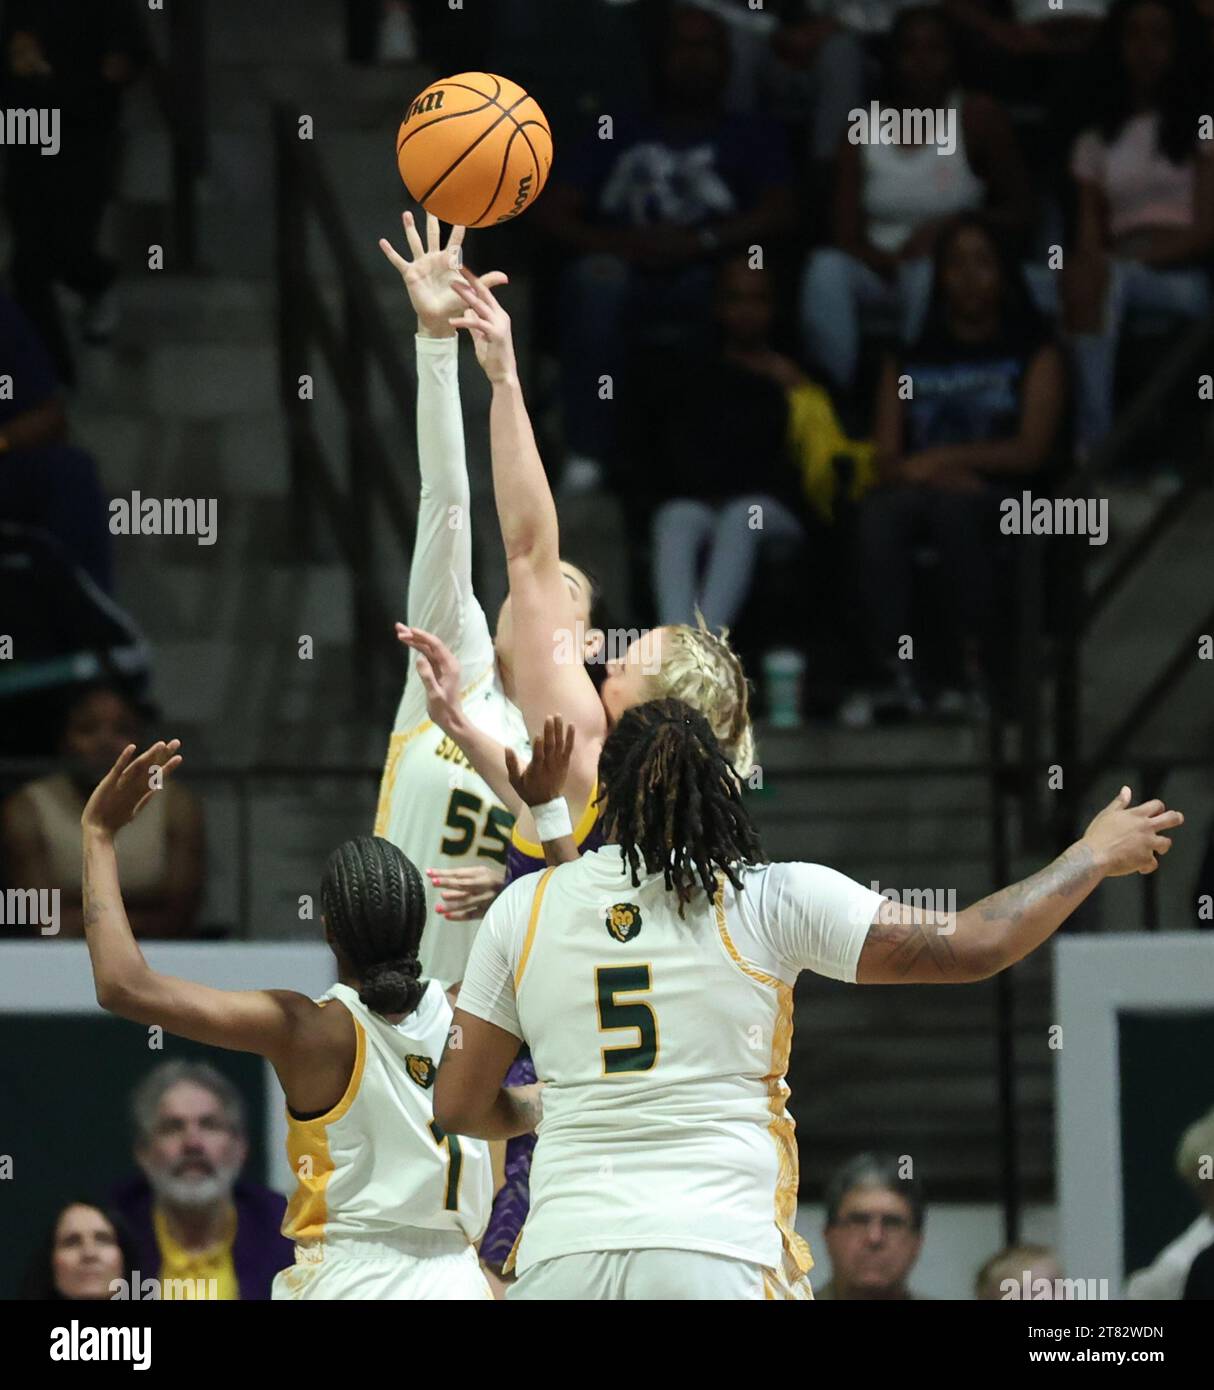 LSU Lady Tigers guard Hailey Van Lith (11) shoots a layup against SE Louisiana Lady Lions guard Hailey Giaratano (55) during a women’s college basketball game at the University Center in Hammond, Louisiana on Friday, November 17, 2023.  (Photo by Peter G. Forest/Sipa USA) Stock Photo